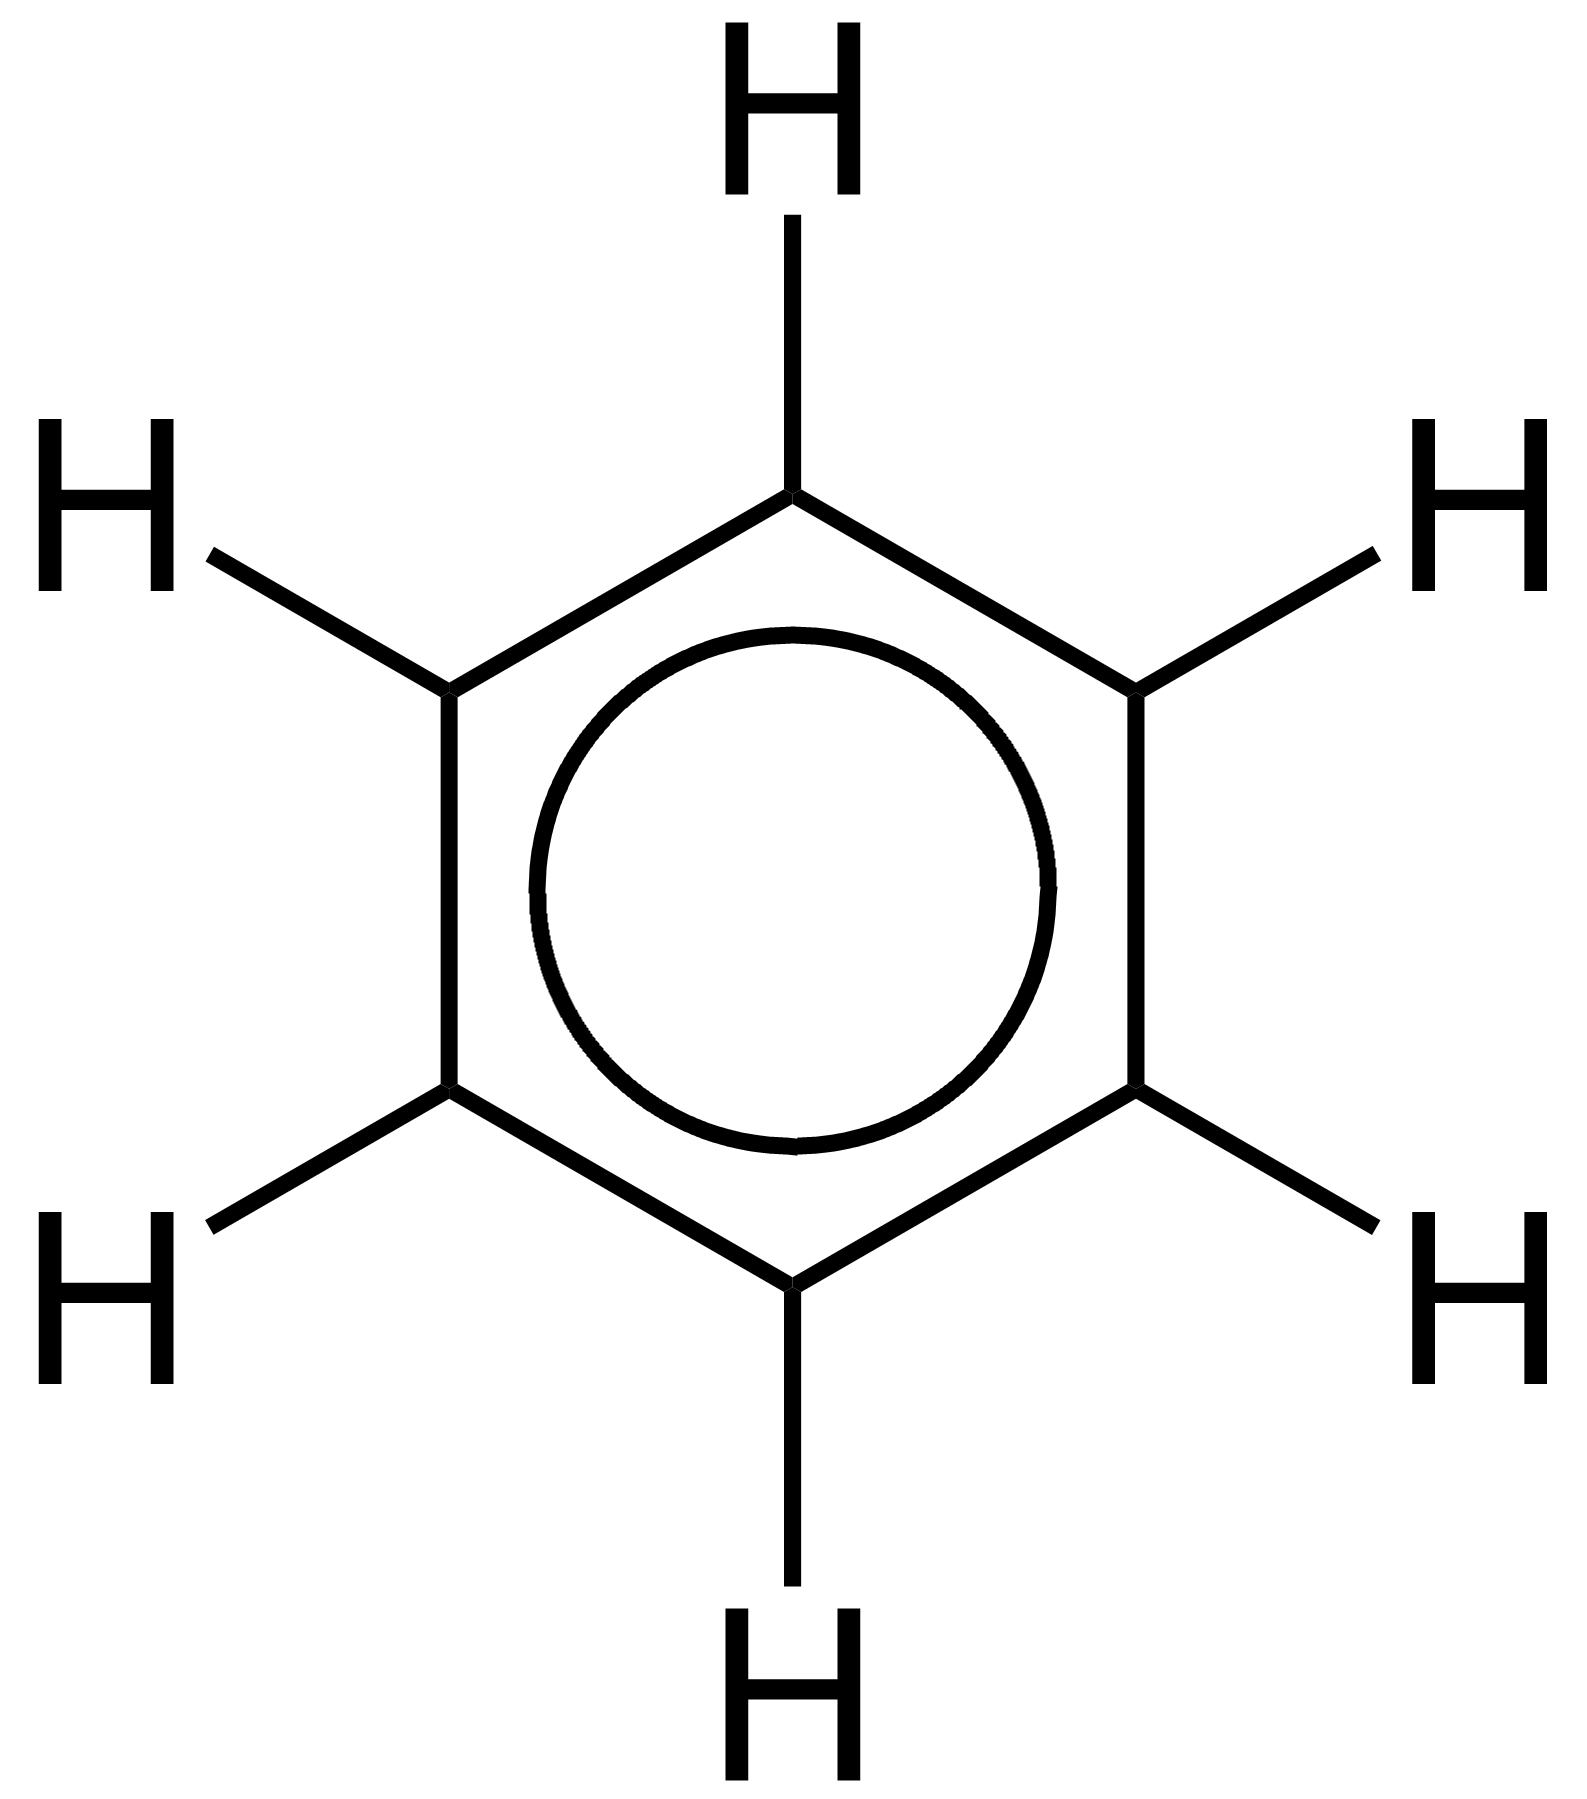 Benzene structure with a circle inside the hexagon